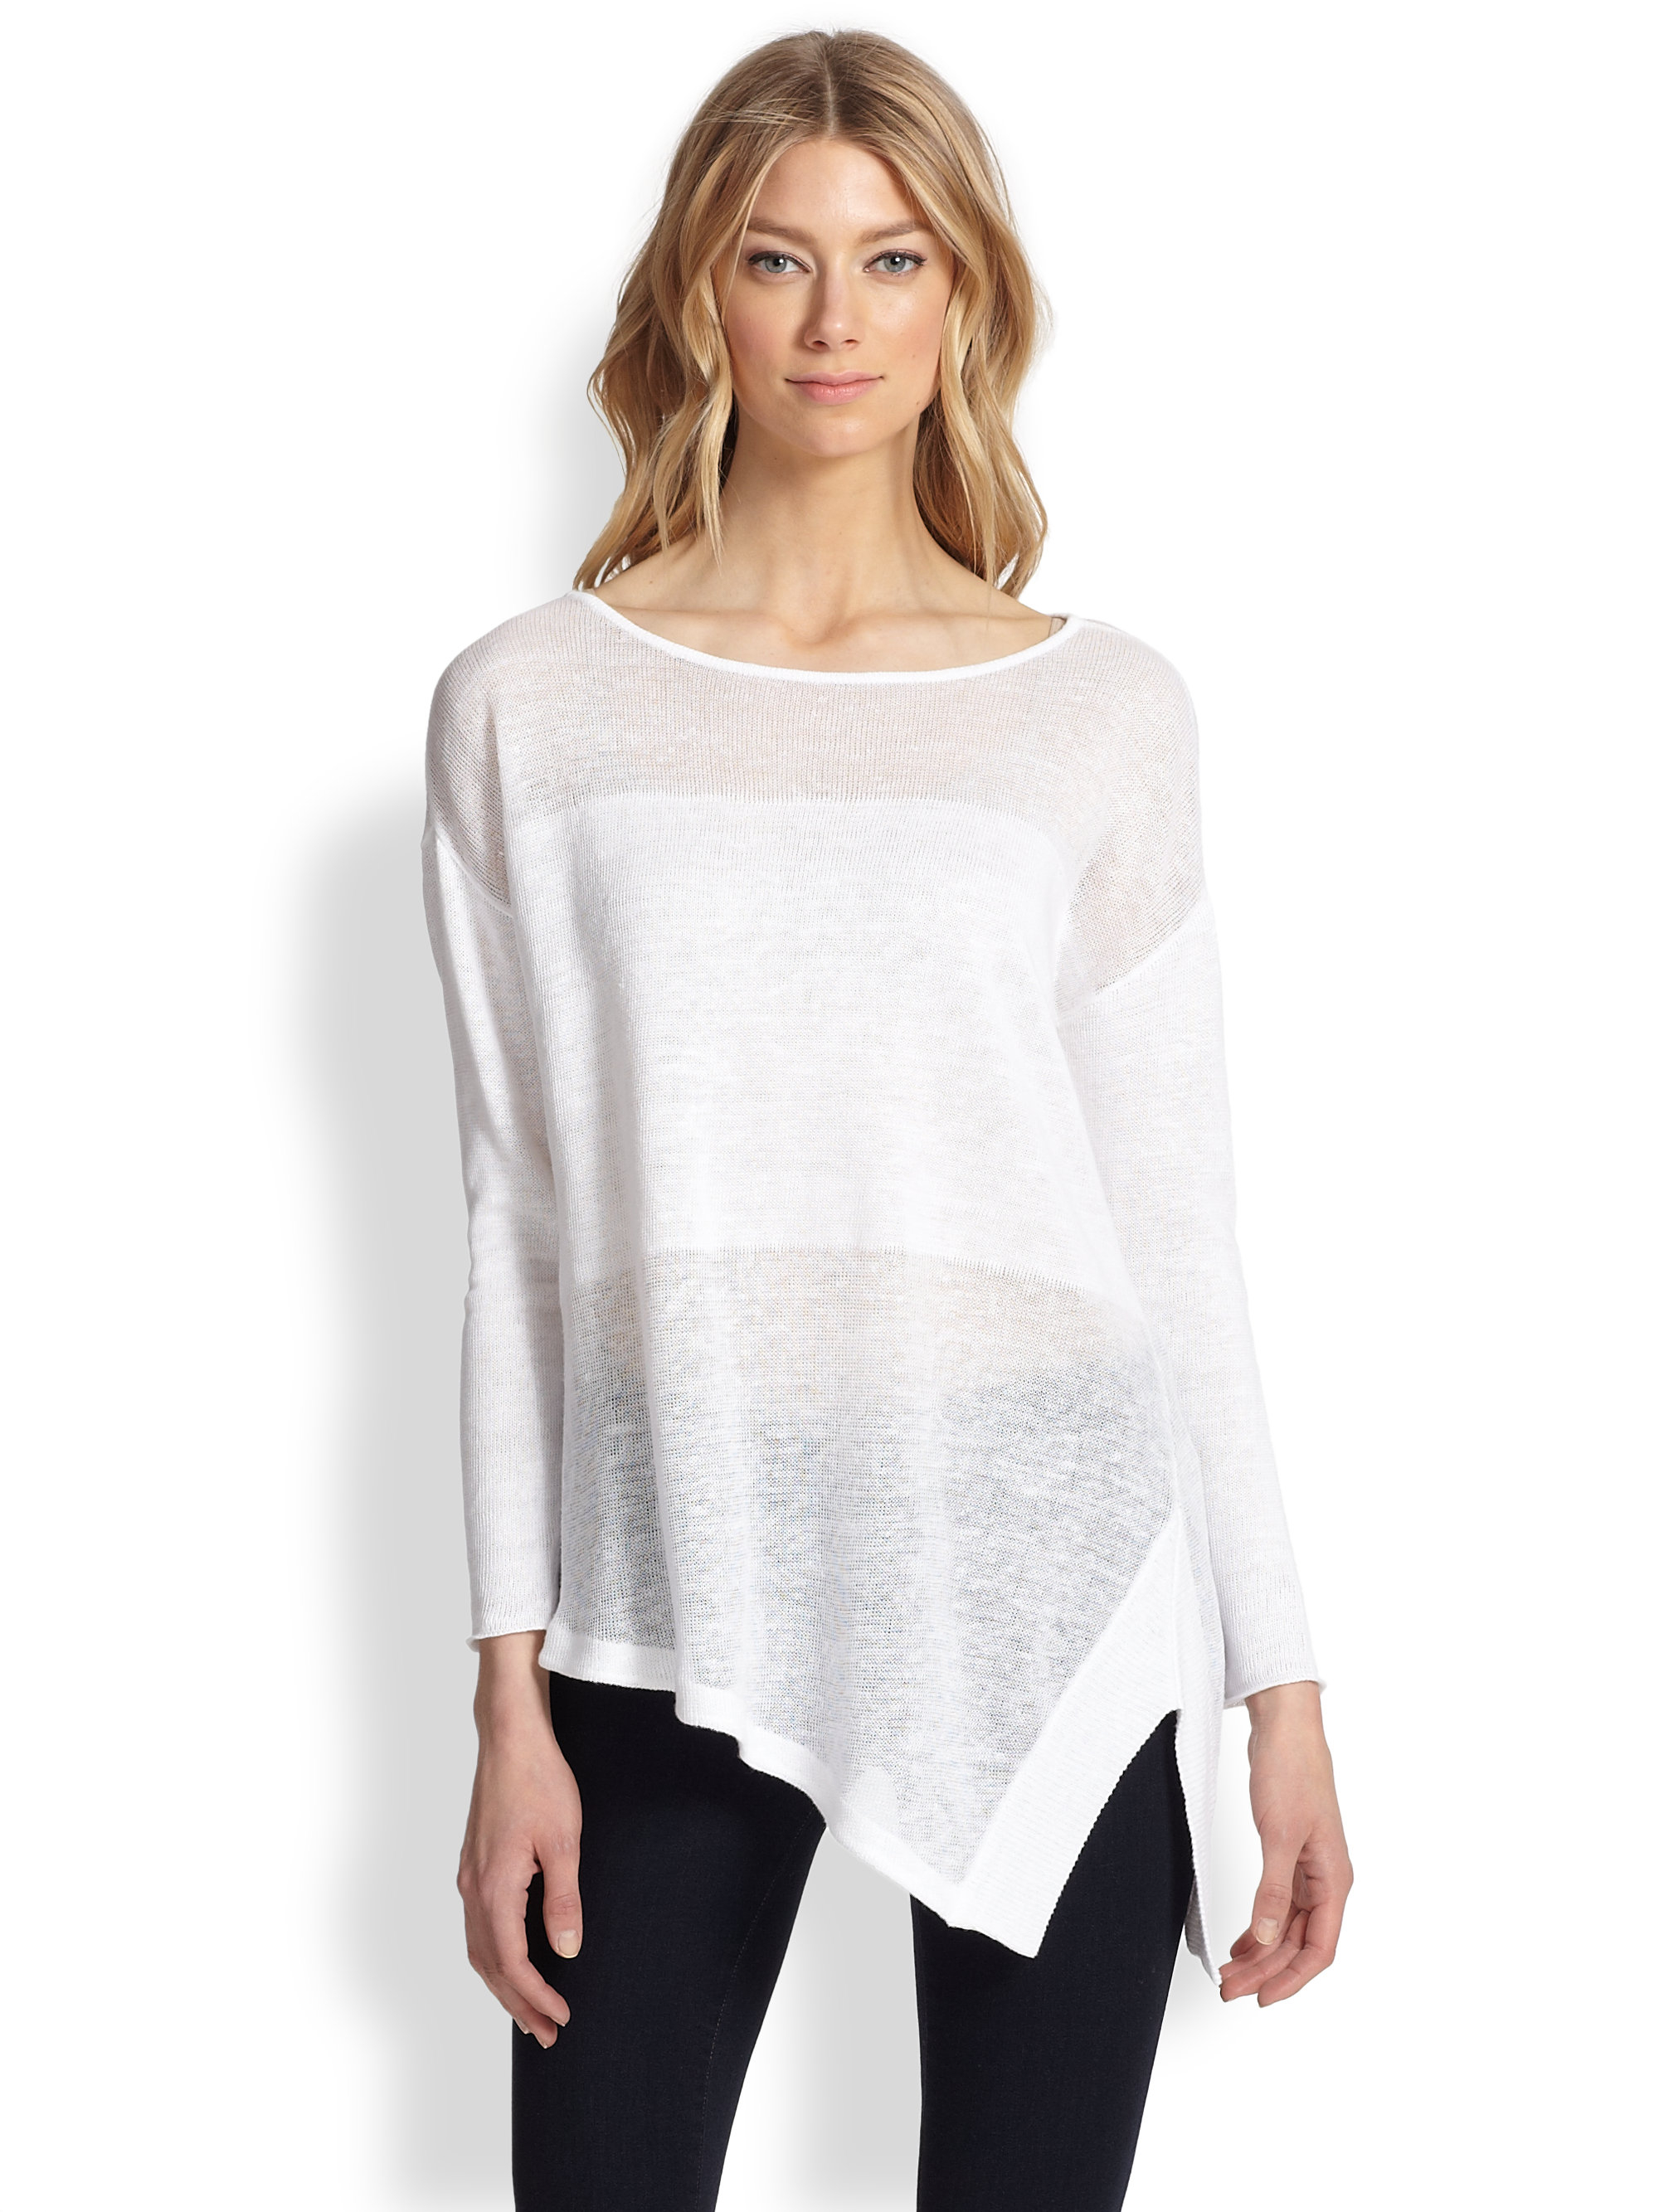 Lyst - Alice + Olivia Catherine Linen Sweater in White